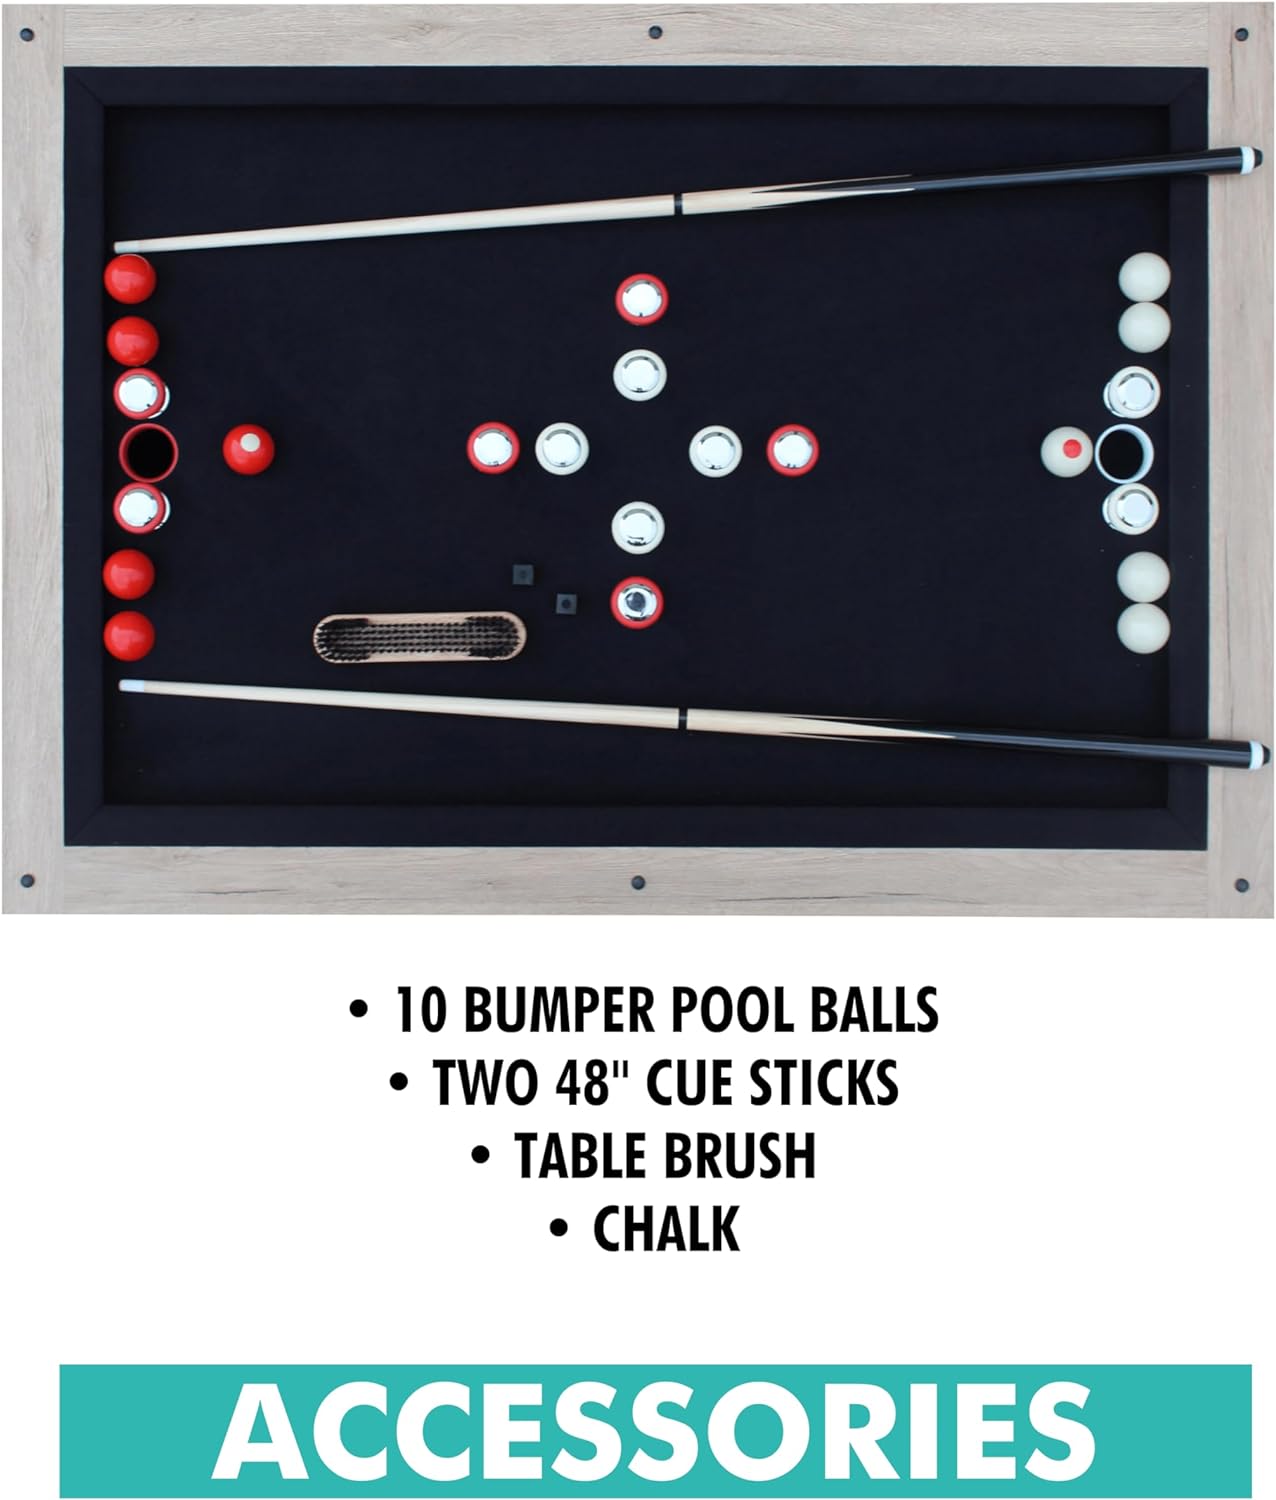 Baddah Bing Bumper Pool Table 54" Perfect for All Ages - Includes 2 Cues, 10 balls and more